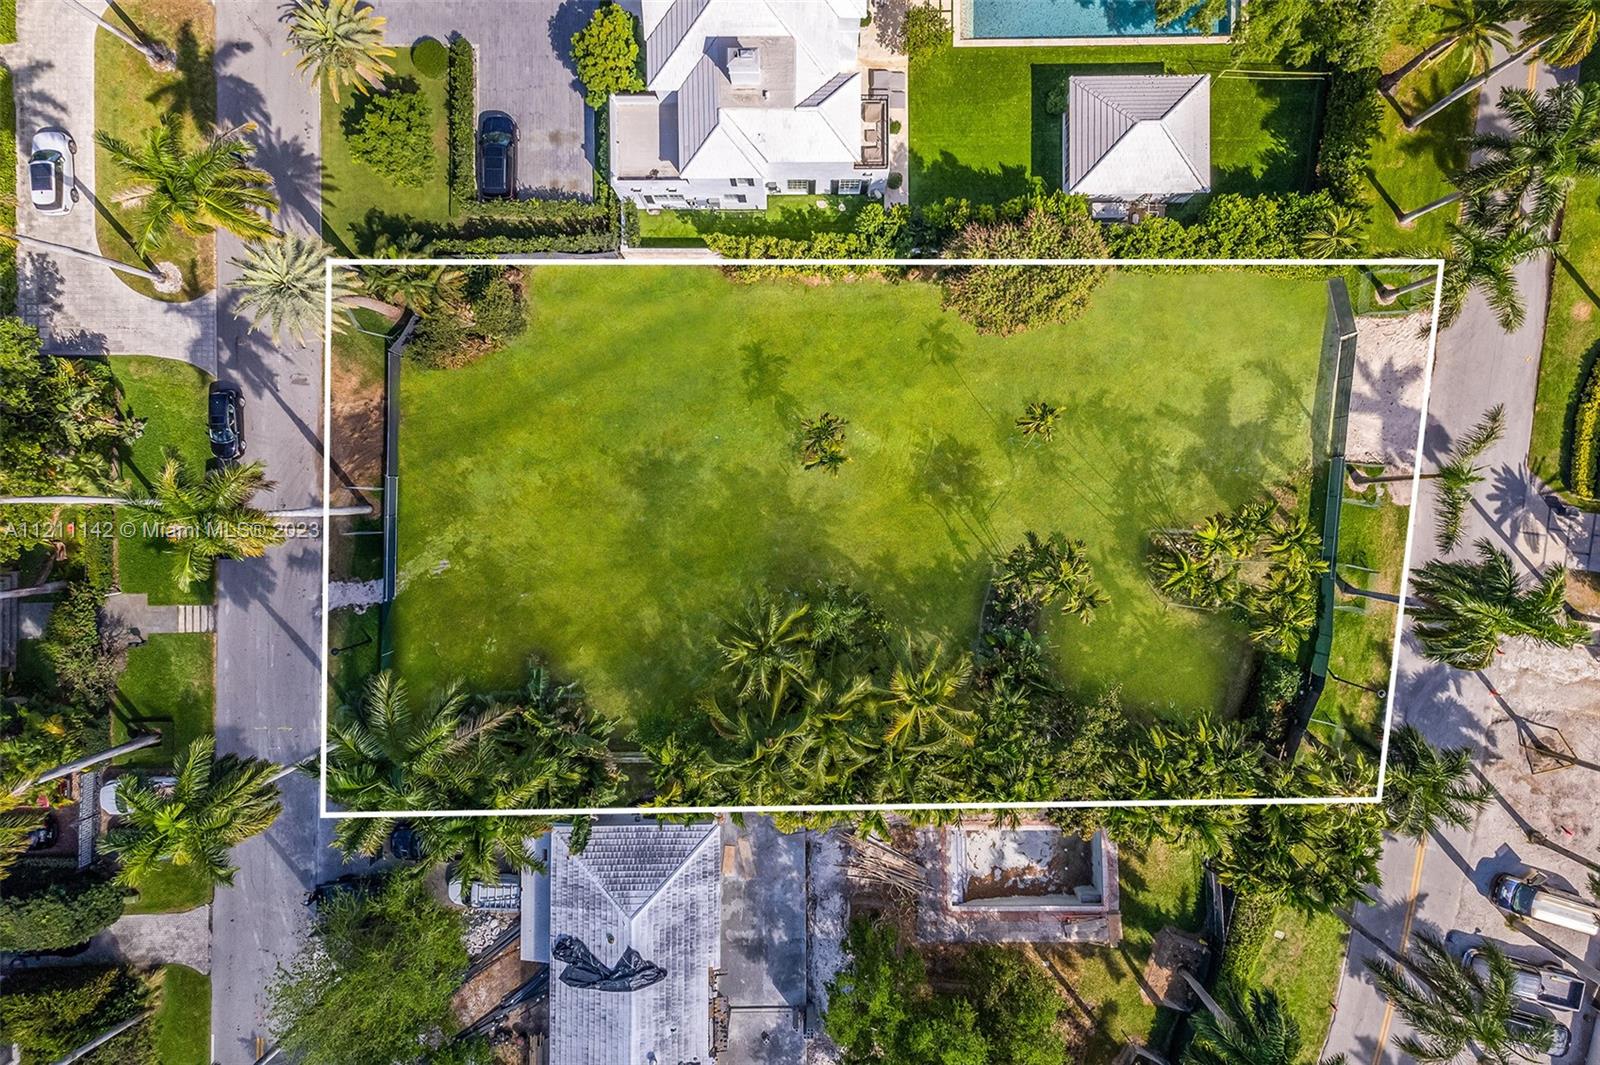 Rare development opportunity to build your dream home on the exclusive and highly coveted gated neighborhood of La Gorce Island. 6625 Pine Tree Ln offers over 17,500 sf of street-to-street land. Being one of only nine lots on La Gorce with no neighbors to the front or back, this property provides an extra air of privacy and exclusivity. With guarded gate entry, 24/7 patrol cars and boat patrol, La Gorce affords peace of mind, safety and security unlike any other. Offering Miami Beach living at its finest, La Gorce Island is the perfect Oasis to call home.  Located just moments away from some of Miami’s most popular landmarks, 15 minutes from the airport, and just a 4-minute drive to the beach and Allison Park, 6625 Pine Tree Ln makes it easy to live the ultimate Miami lifestyle.